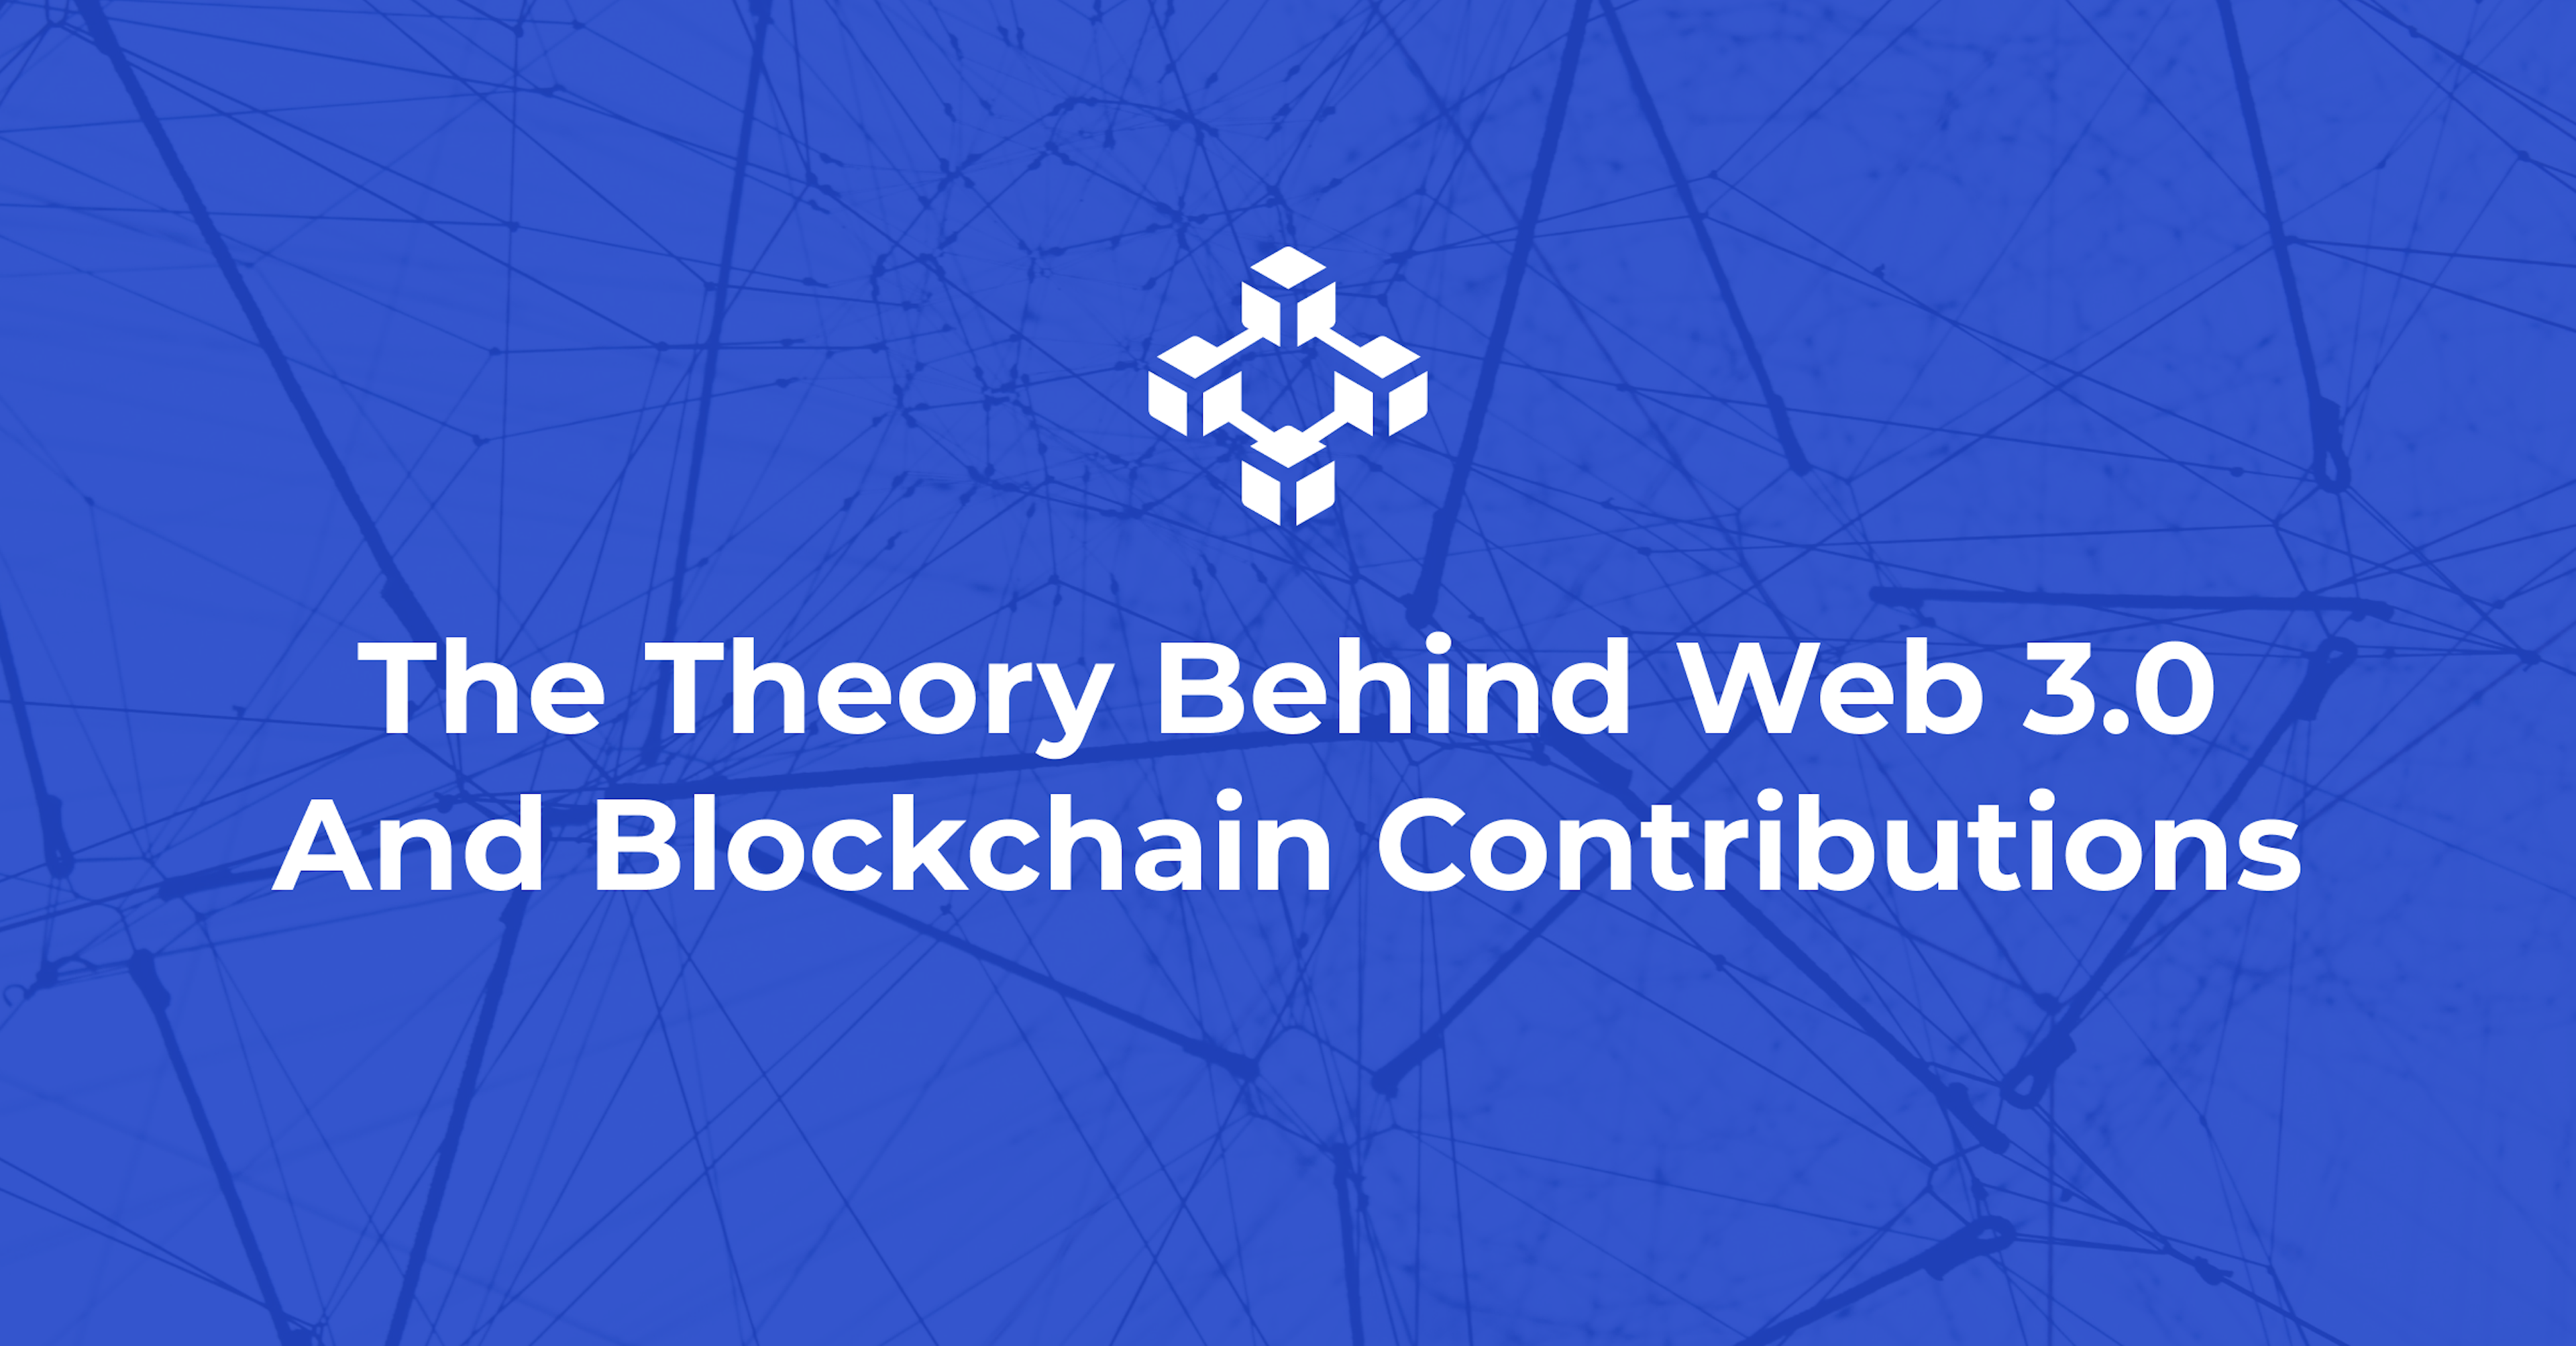 The Theory Behind Web 3.0 (Semantic Web) And Blockchain Contributions